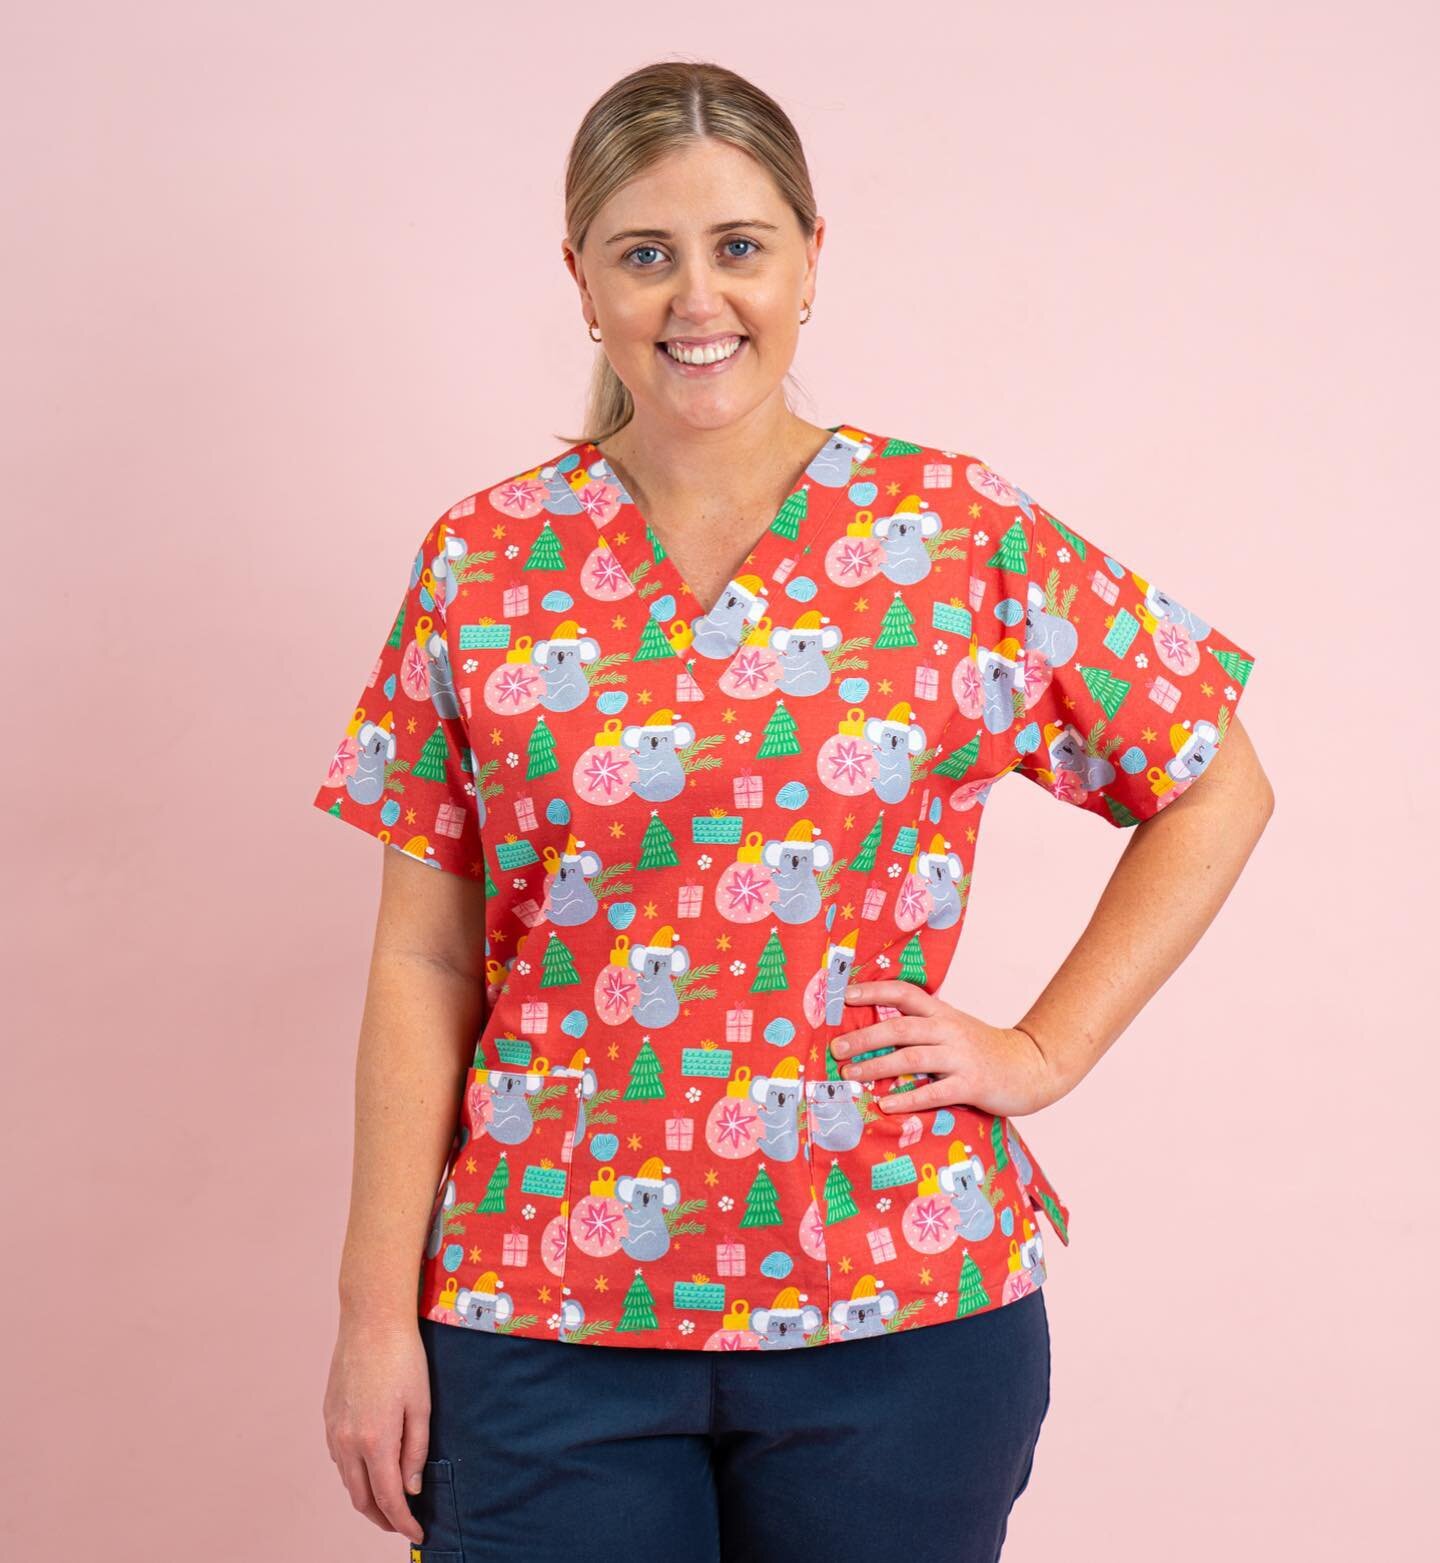 My simply ah-mazing model Maddie here is wearing a size 12 Christmas Koala. She also wears a size 10 comfortably so you can choose your fit!

We have a size chart on our site so you can compare the scrubs to your current work ones. If you can&rsquo;t